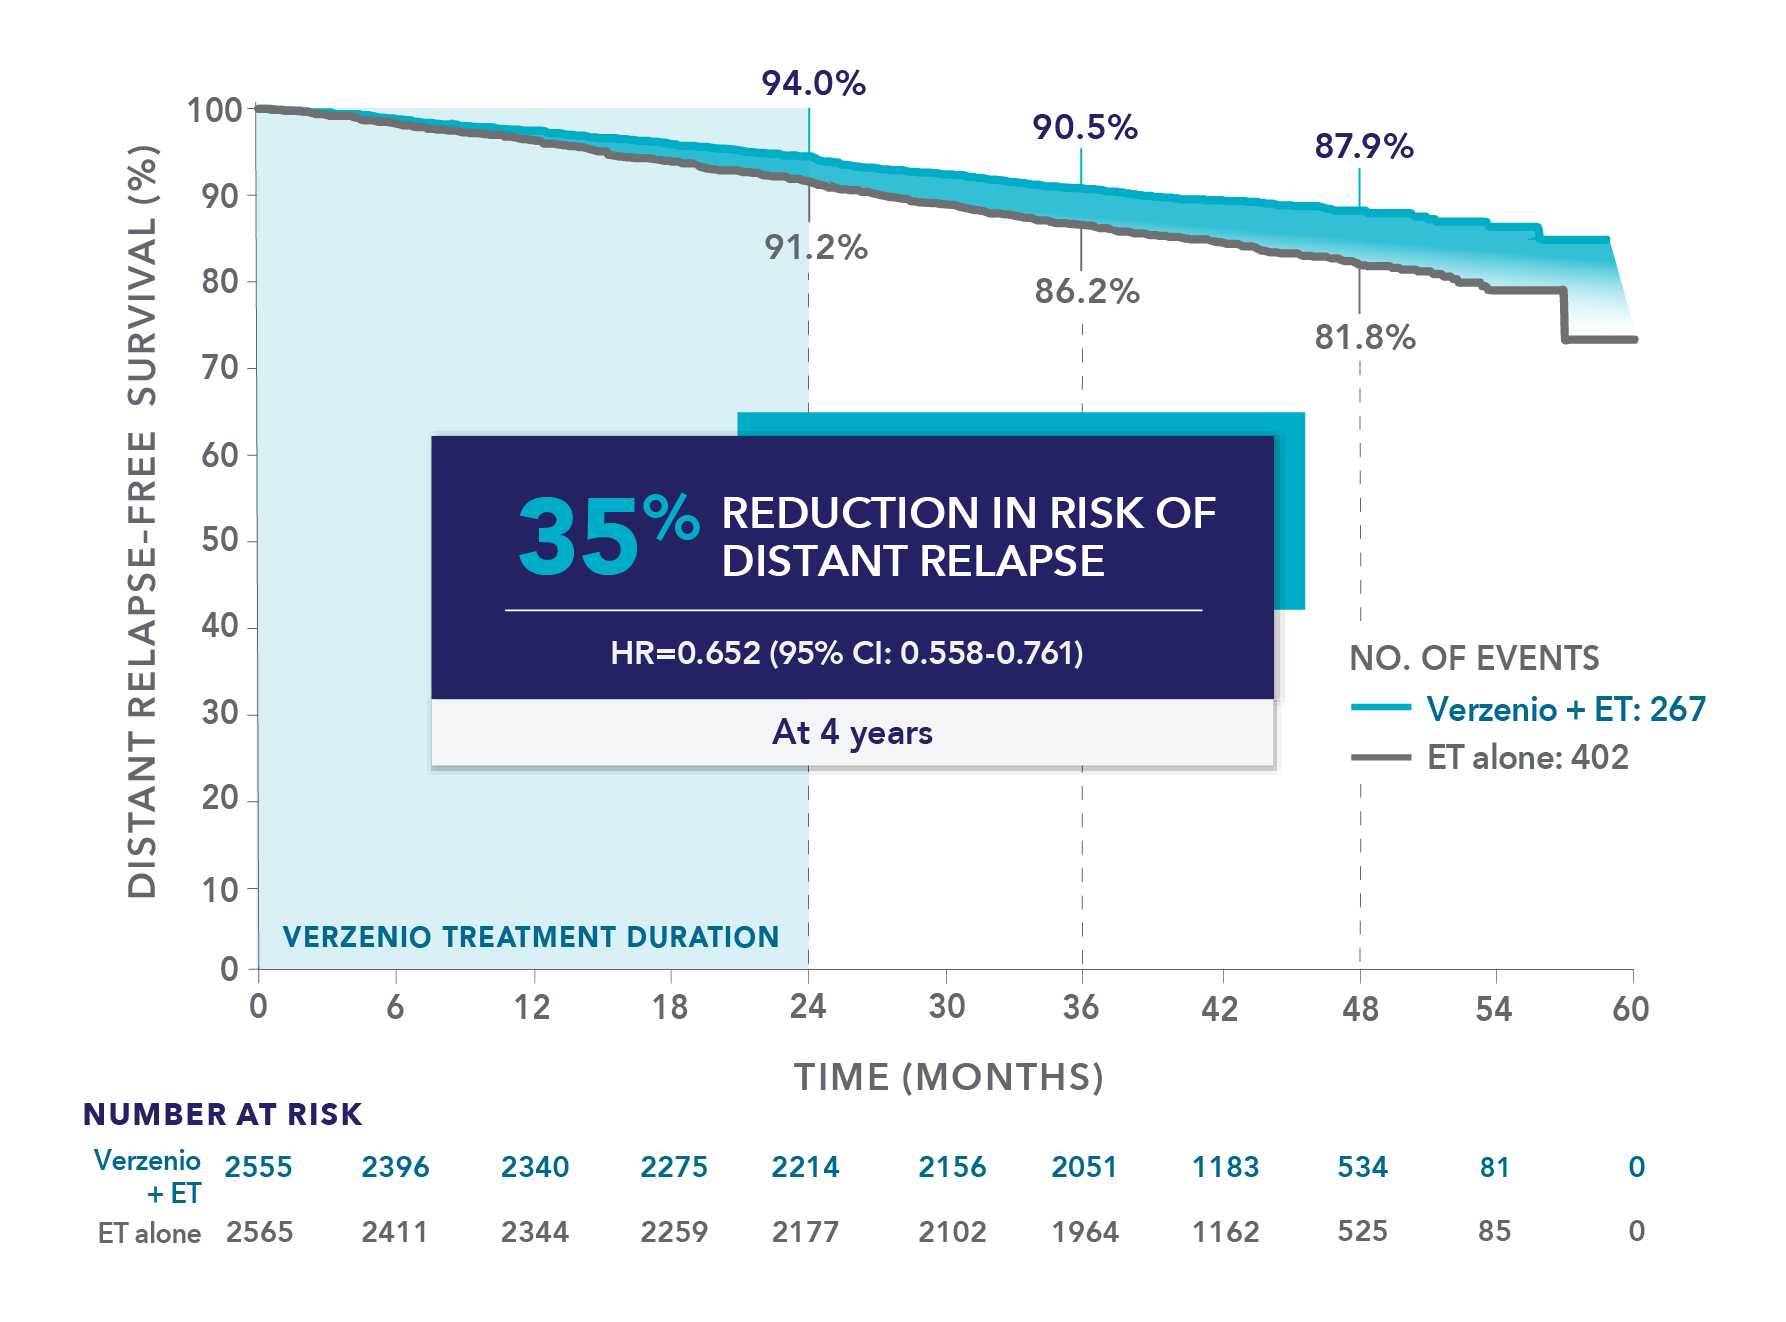 At 4 years, there was a 35% reduction in risk of distant relapse